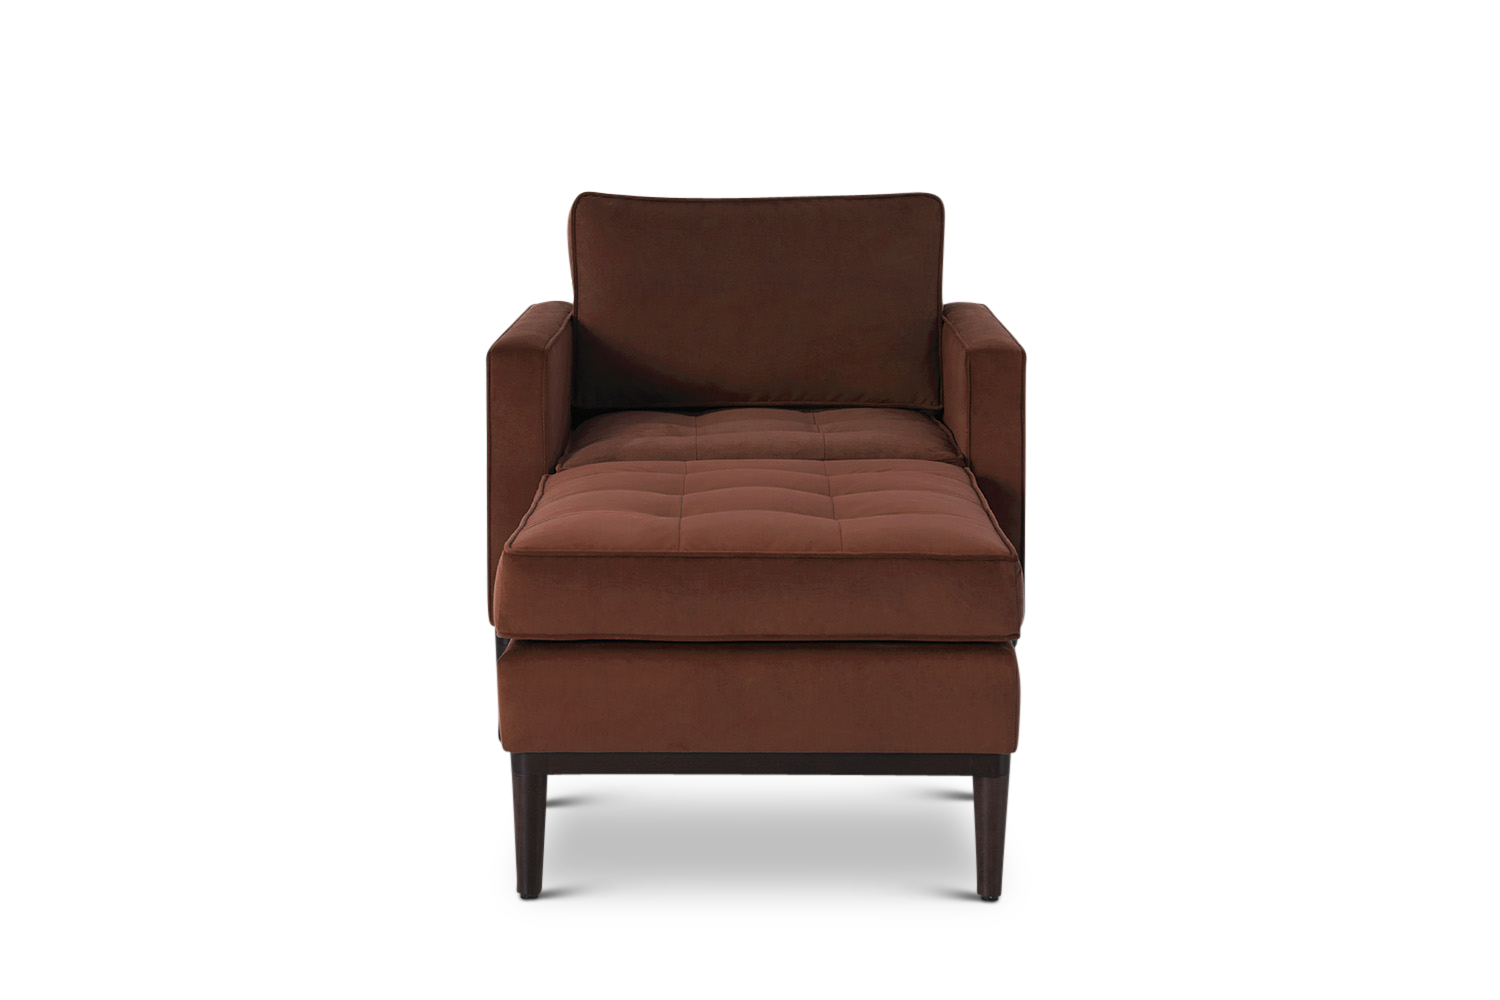 Model 02 Sofas | Mid Century Sofas | Quick Delivery | Swyft